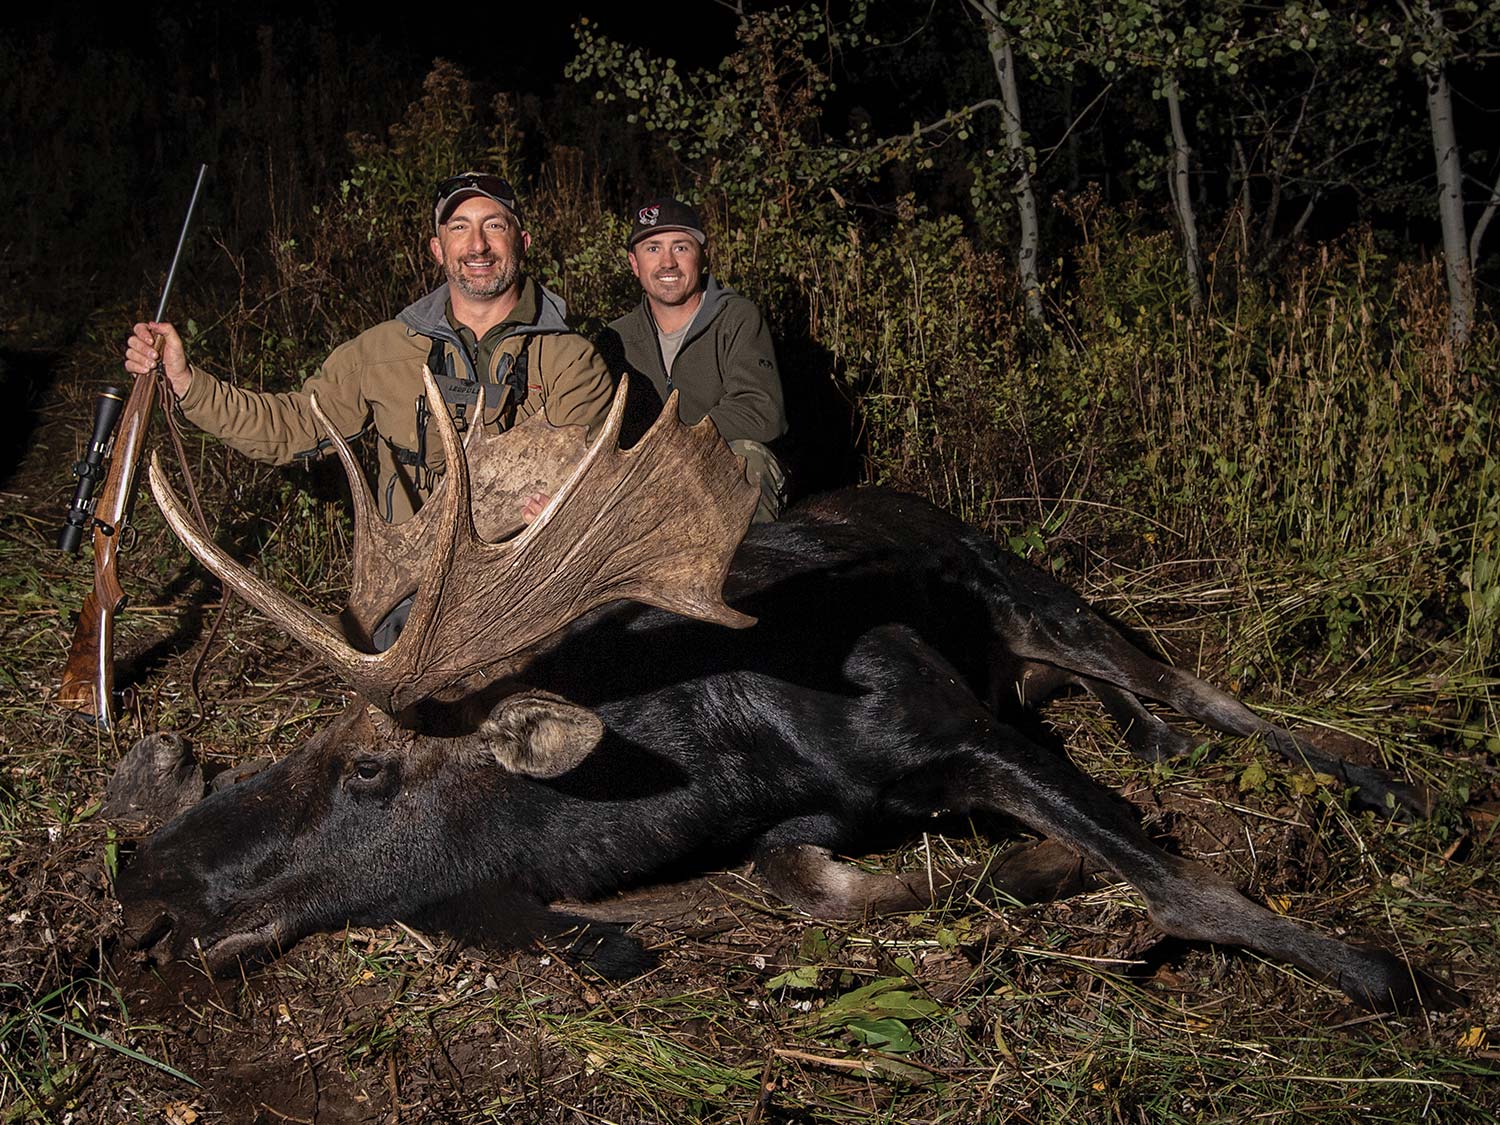 Two hunters kneel behind a large bull moose at night.